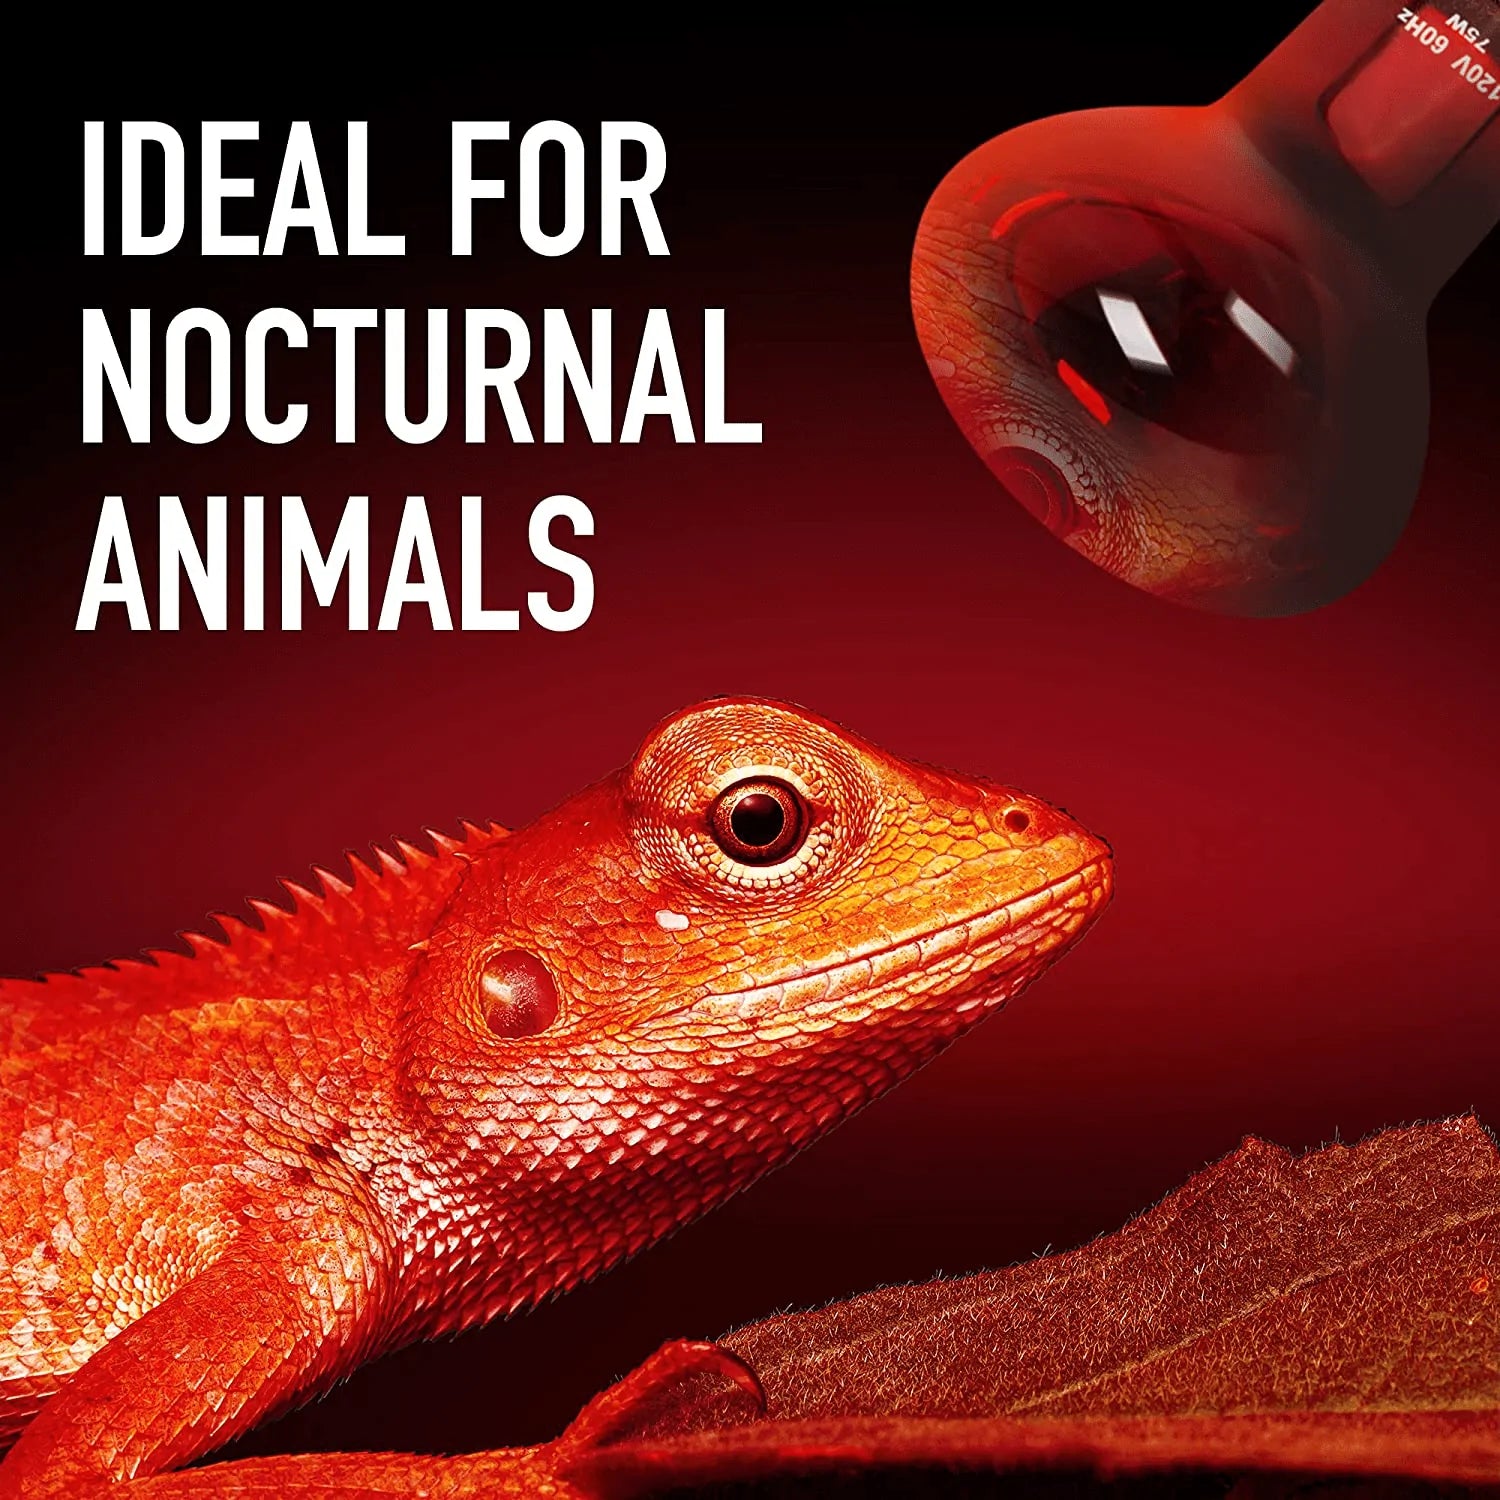 [2-Pack]‌ ‌75‌ ‌Watt‌ ‌Infrared‌ ‌Heat‌ ‌Lamp Bulb‌ ‌For‌ ‌Reptiles‌ ‌-‌ ‌‌ Keeps‌ ‌Your‌ ‌Animals‌ ‌Warm‌ ‌-‌ ‌Red‌ ‌Heat‌ ‌Lamp‌ ‌Bulb‌ ‌Compatible‌ ‌With‌ ‌A‌ ‌Variety‌ ‌Of‌ ‌Enclosures‌